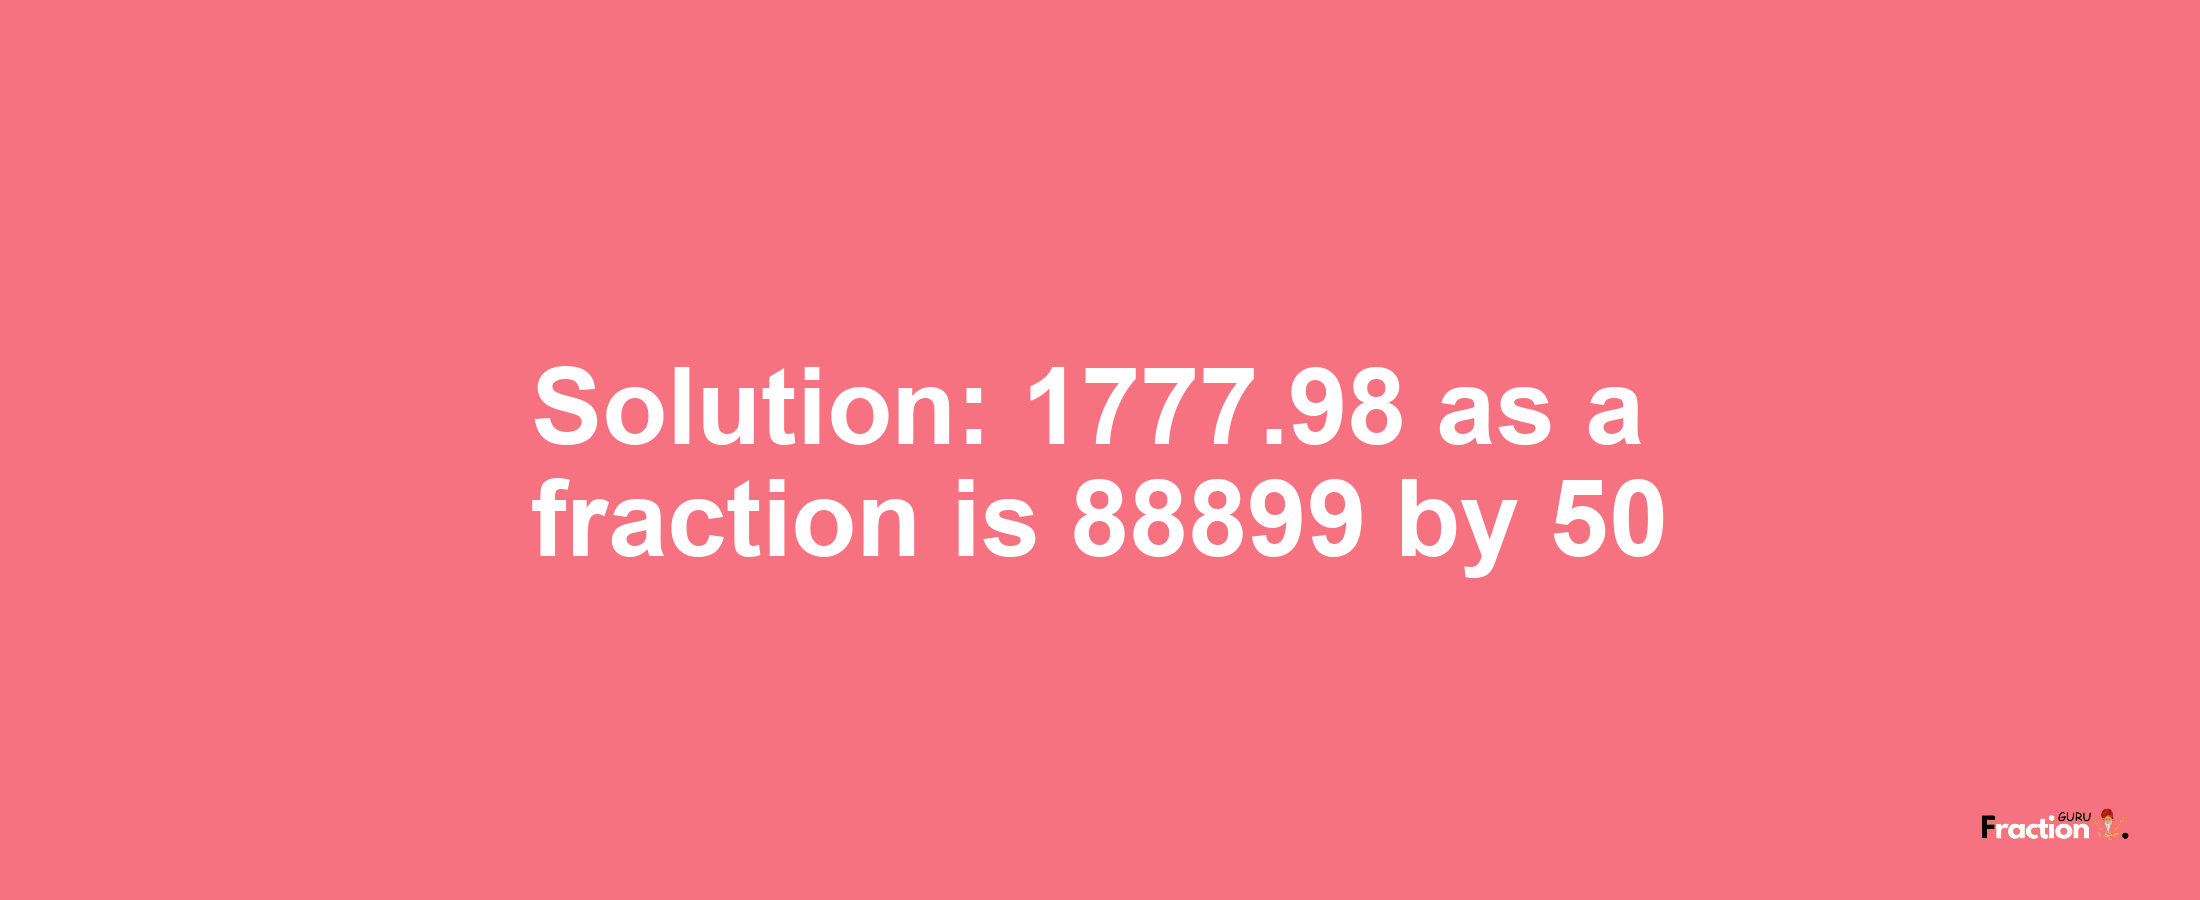 Solution:1777.98 as a fraction is 88899/50